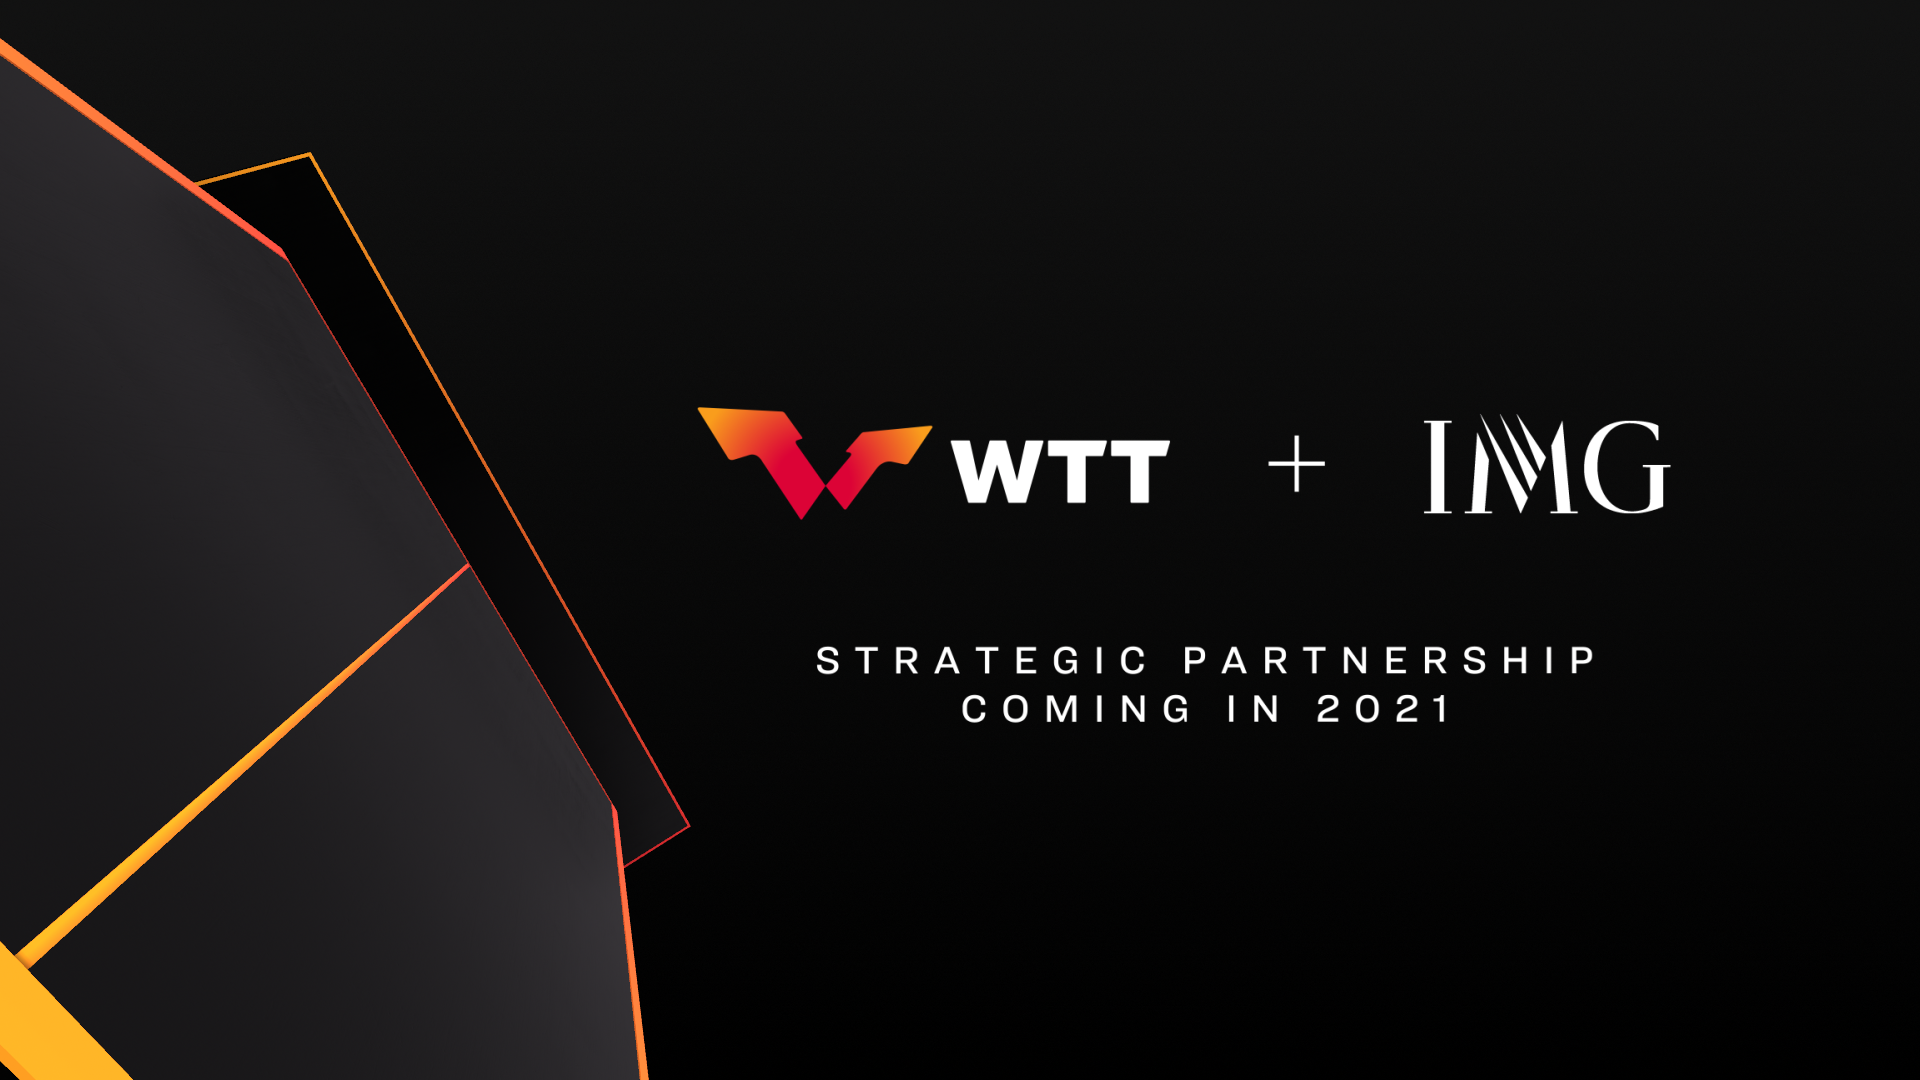 WTT signed a long-term strategic partnership with global sports and events company IMG ©WTT